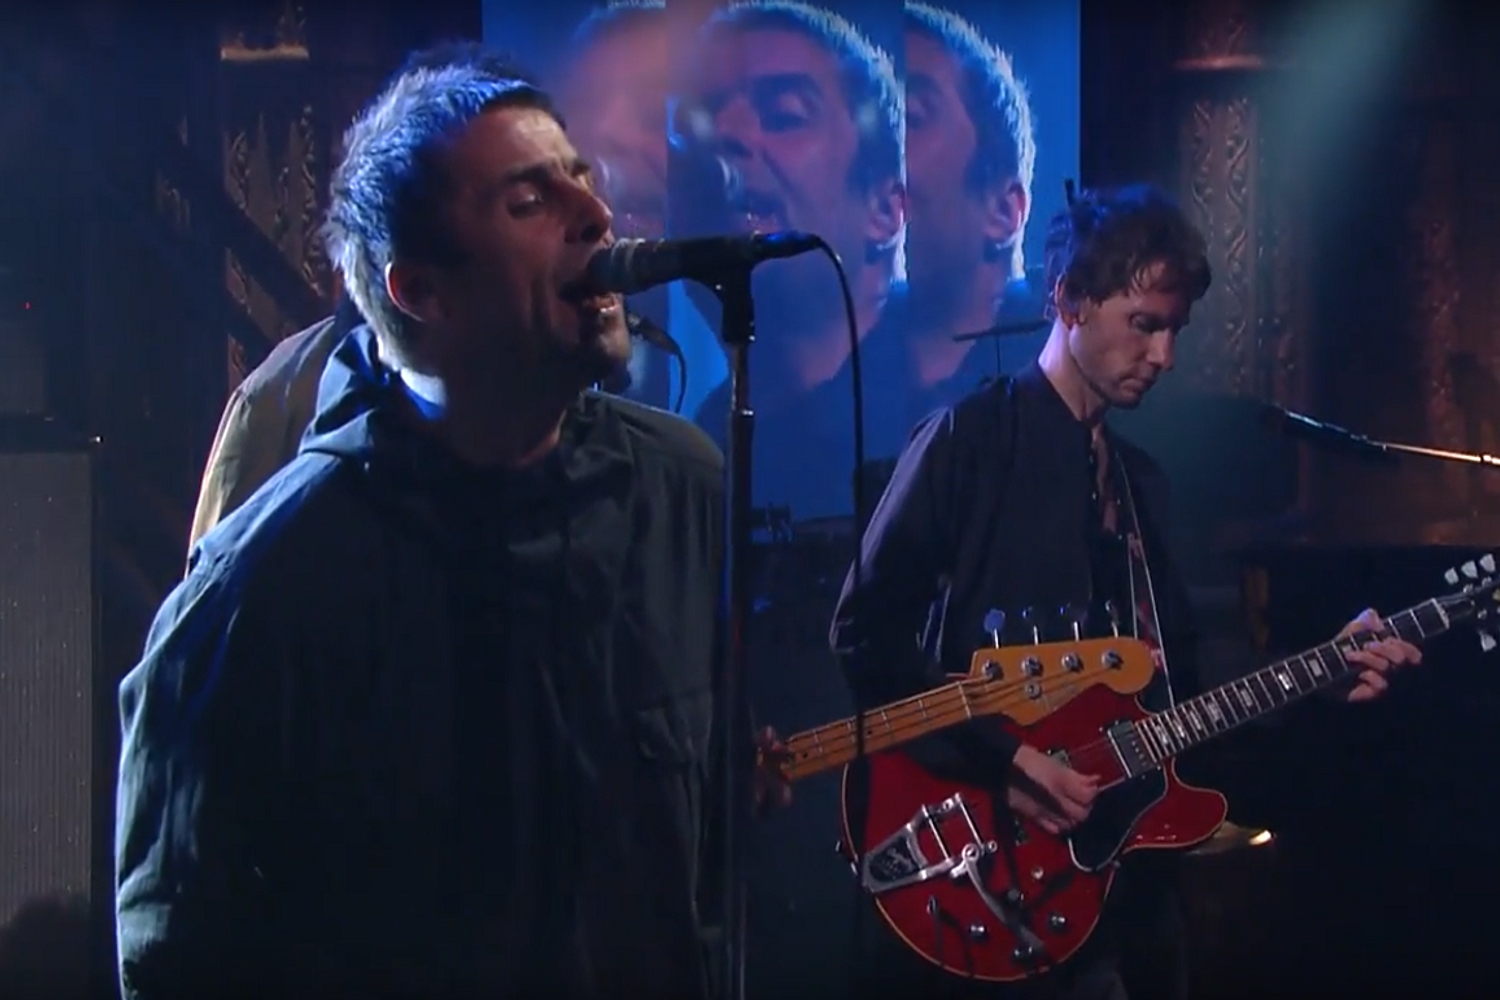 Watch Liam Gallagher play two tracks on Colbert